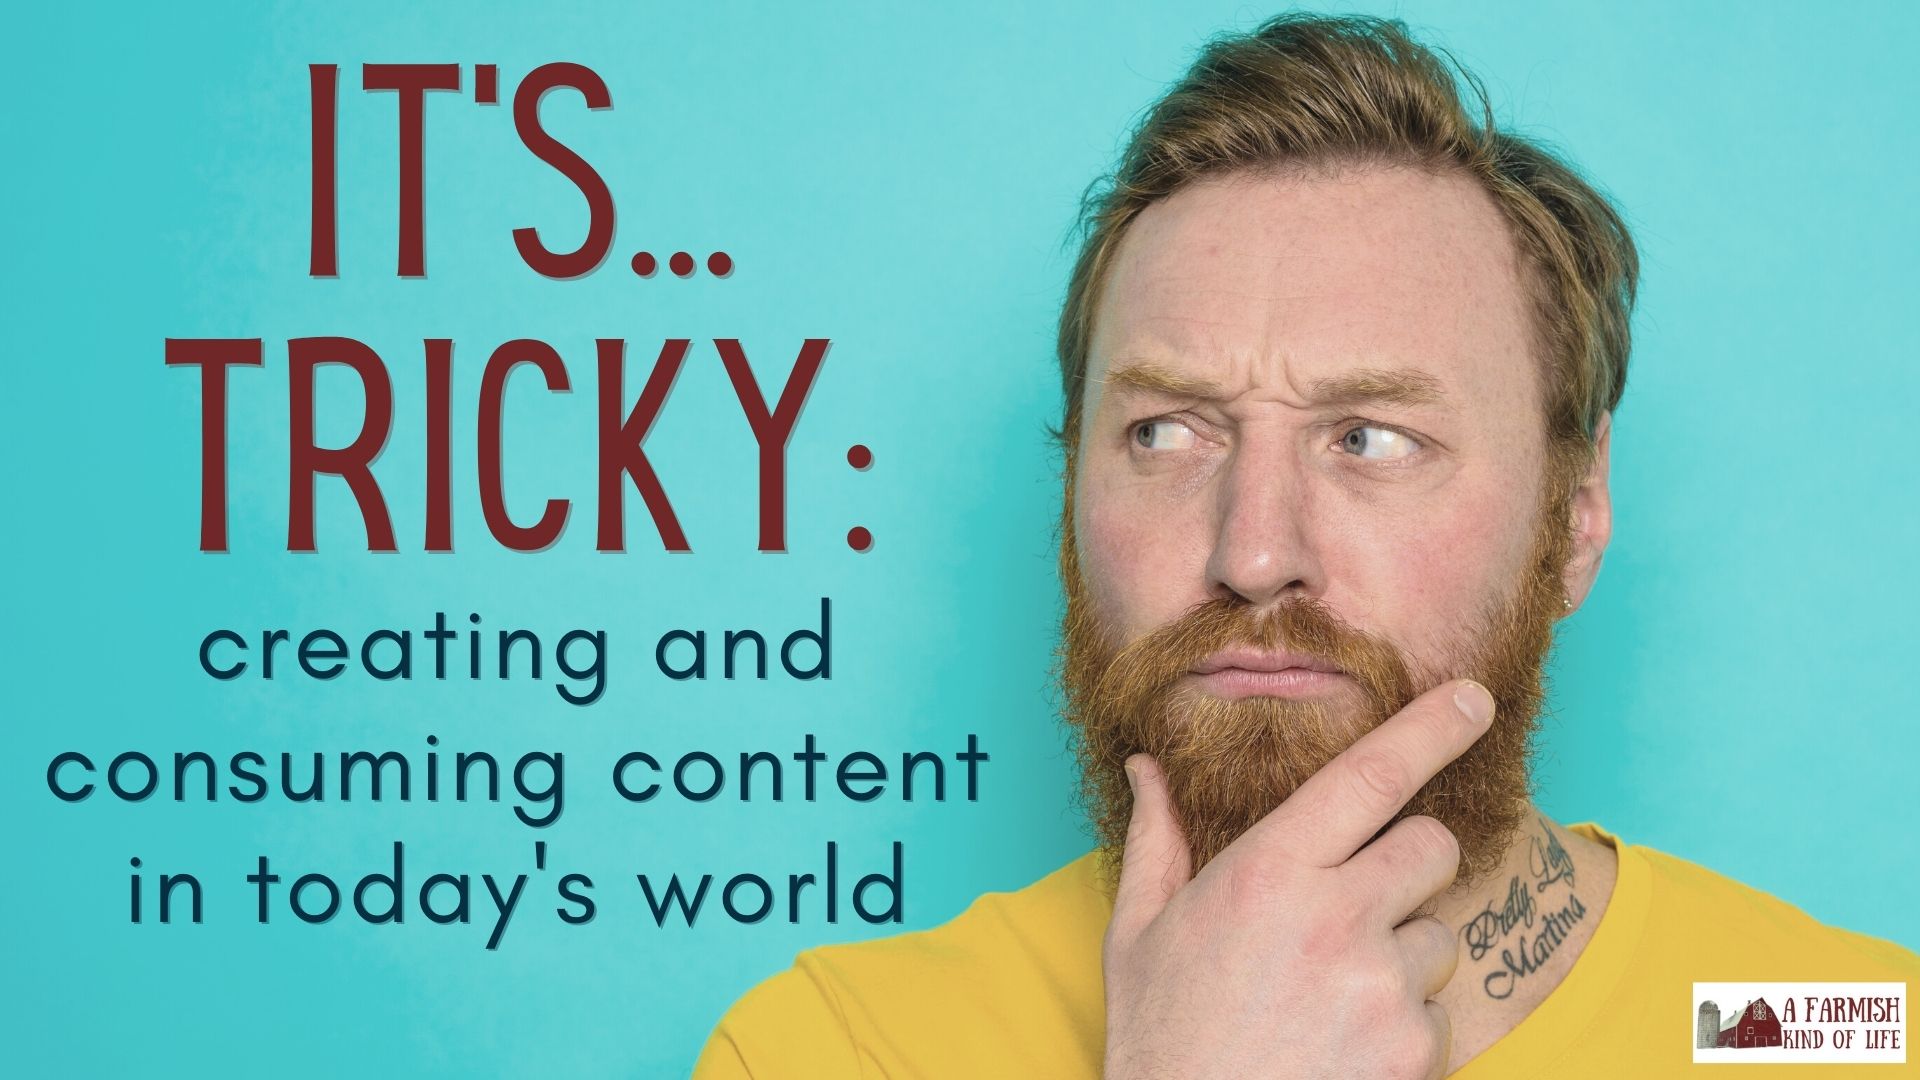 182: It’s tricky: creating and consuming content in today’s world